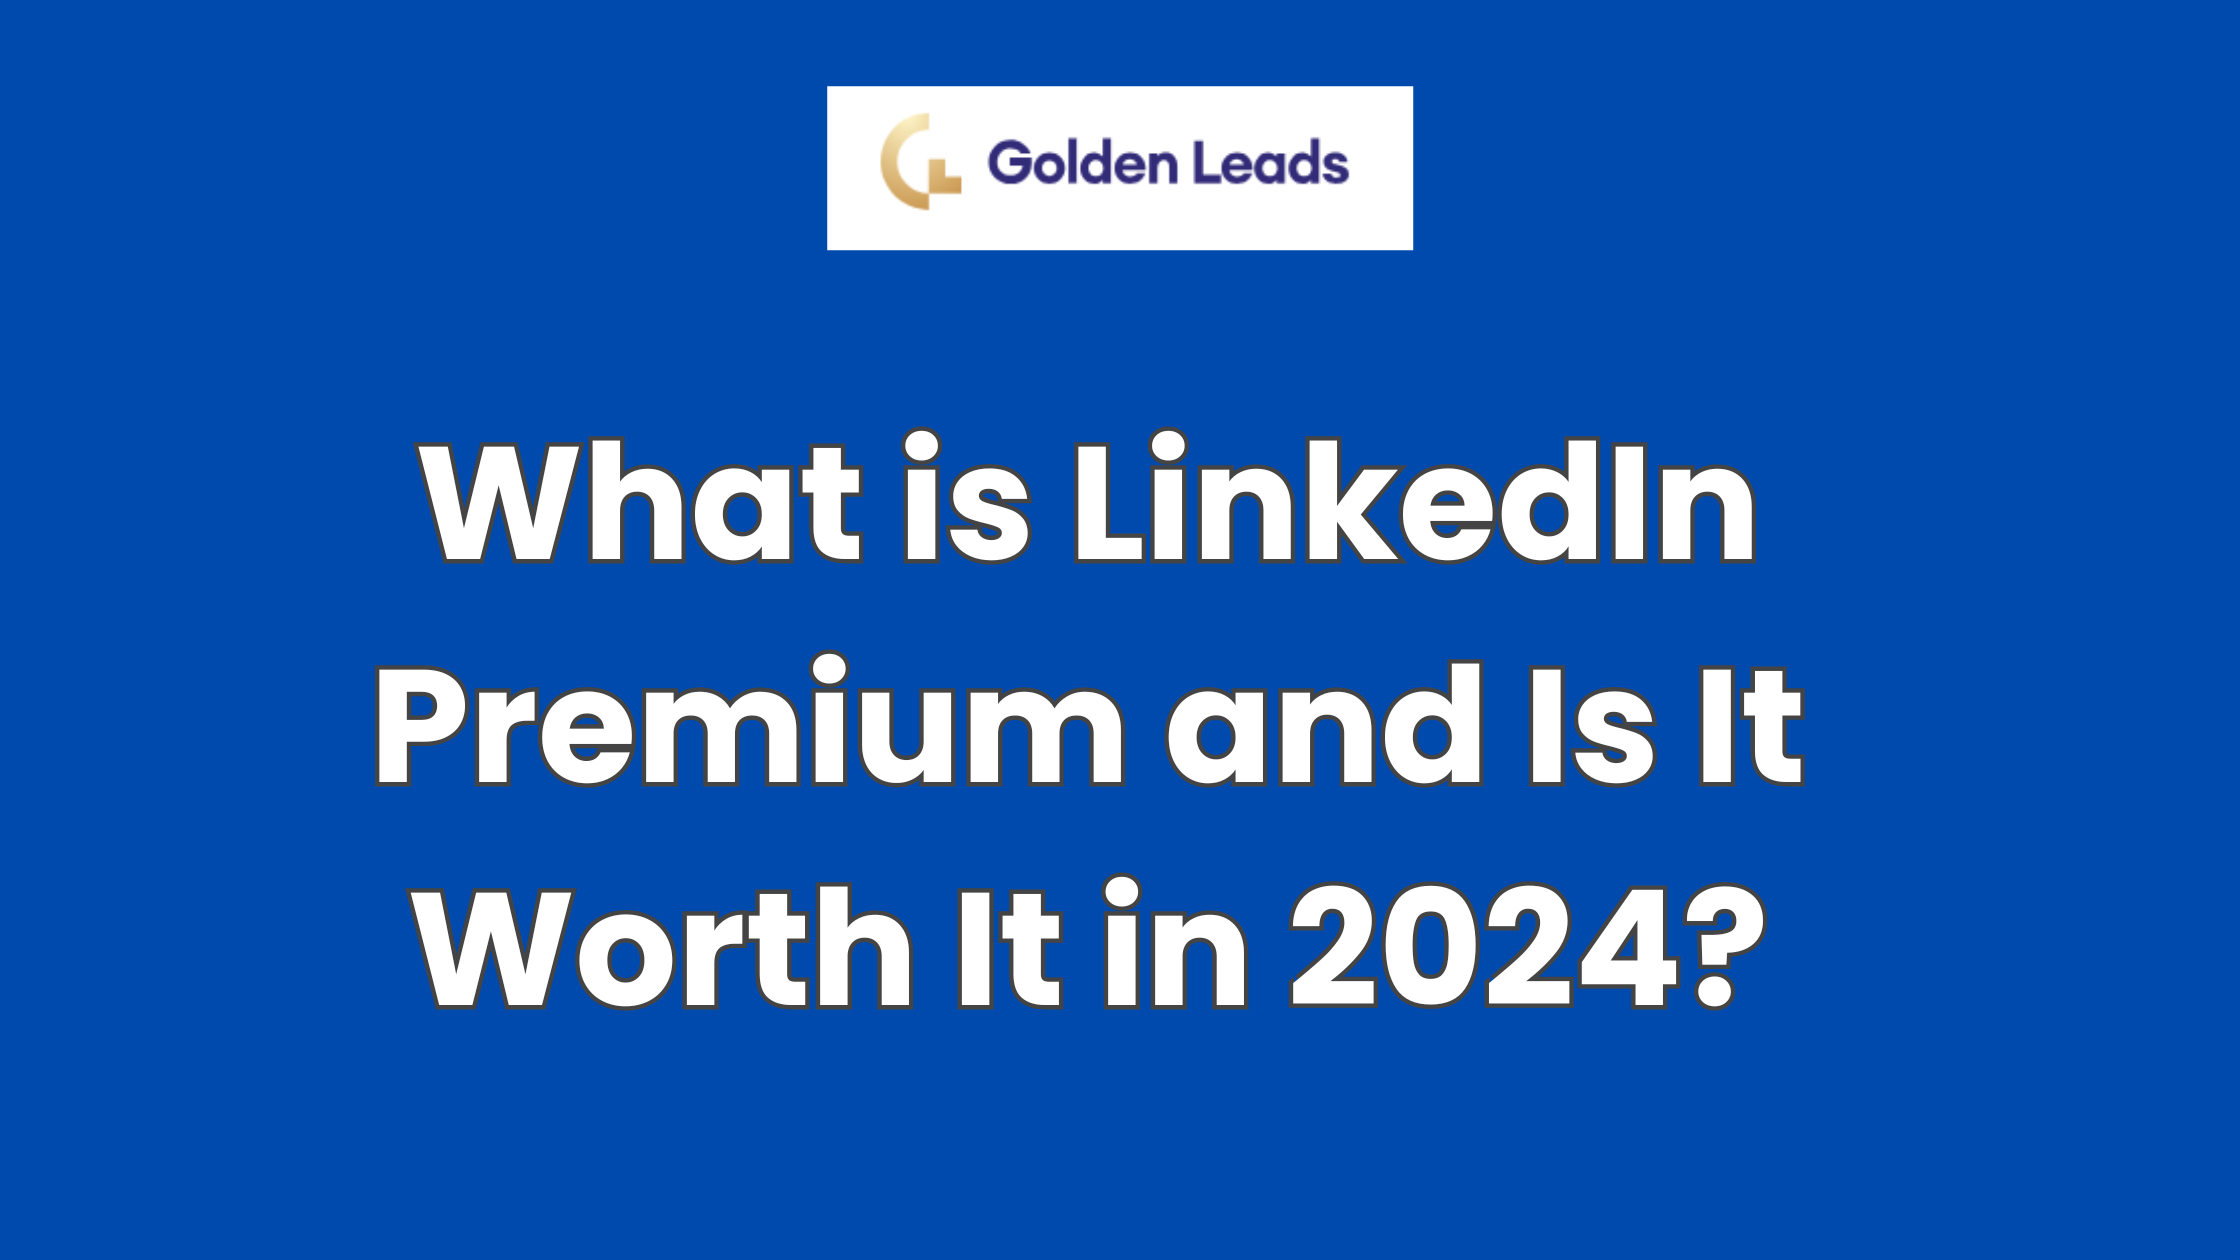 What is LinkedIn Premium and Is It Worth It in 2024?